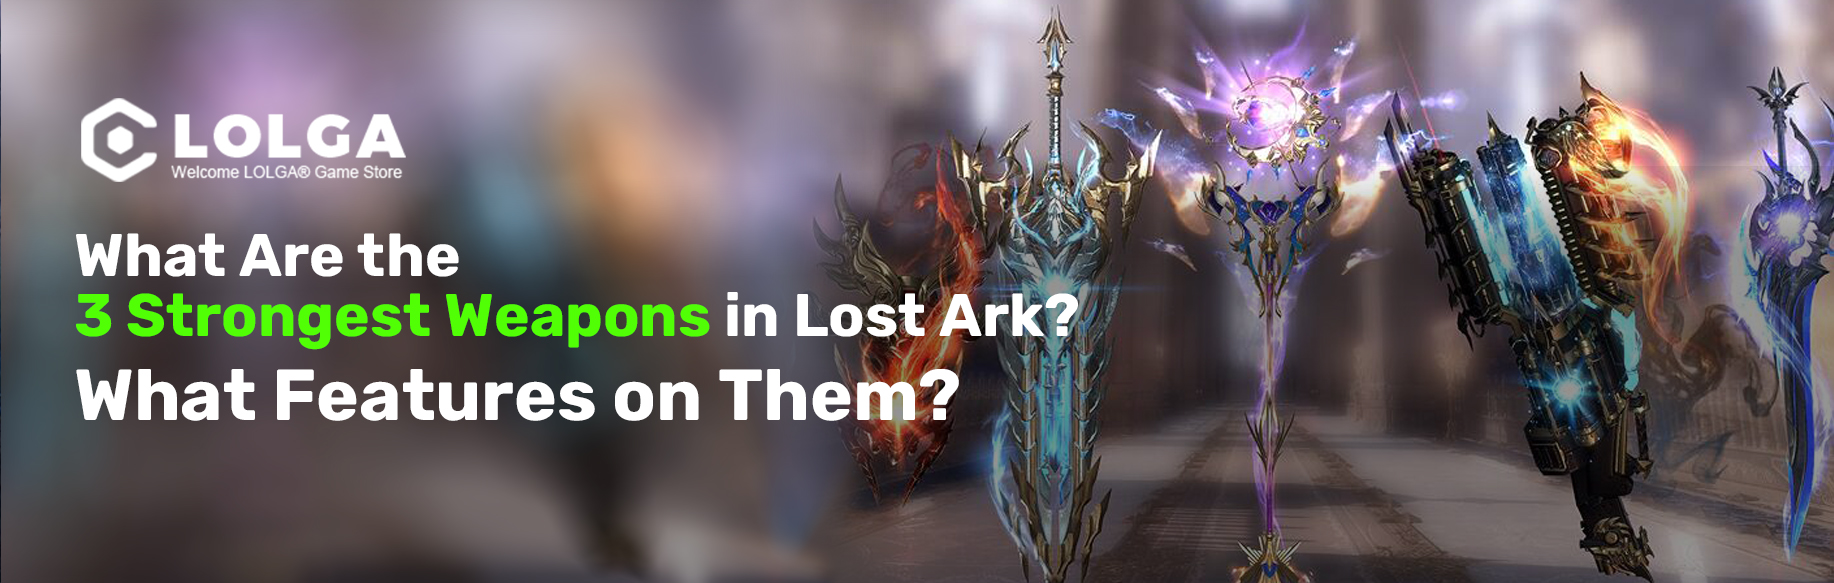 What Are the 3 Strongest Weapons in Lost Ark? What Features on Them?